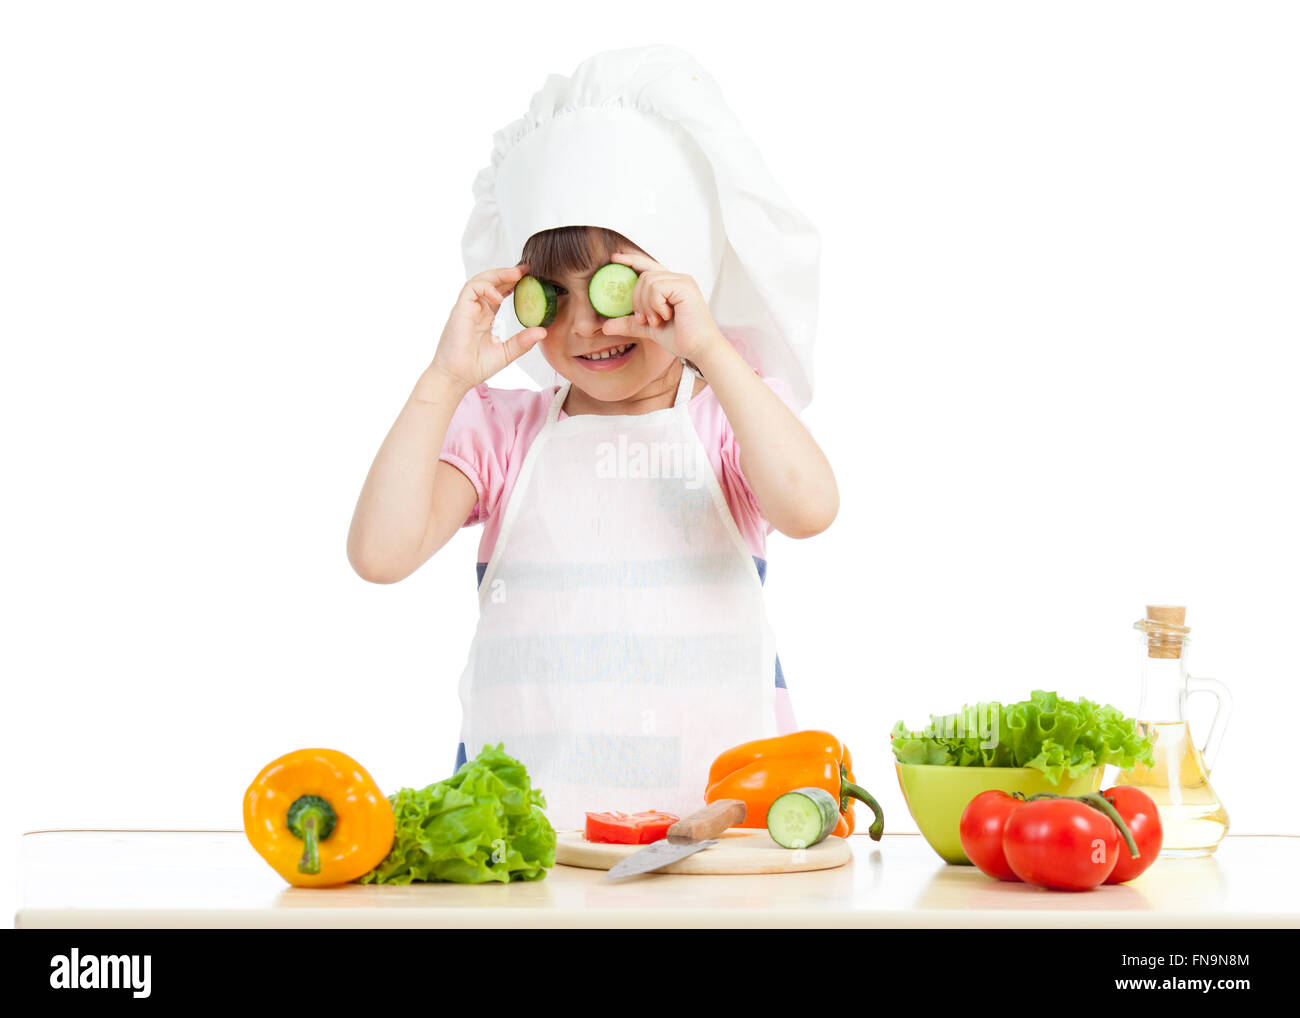 Funny chef girl cooking at kitchen Stock Photo